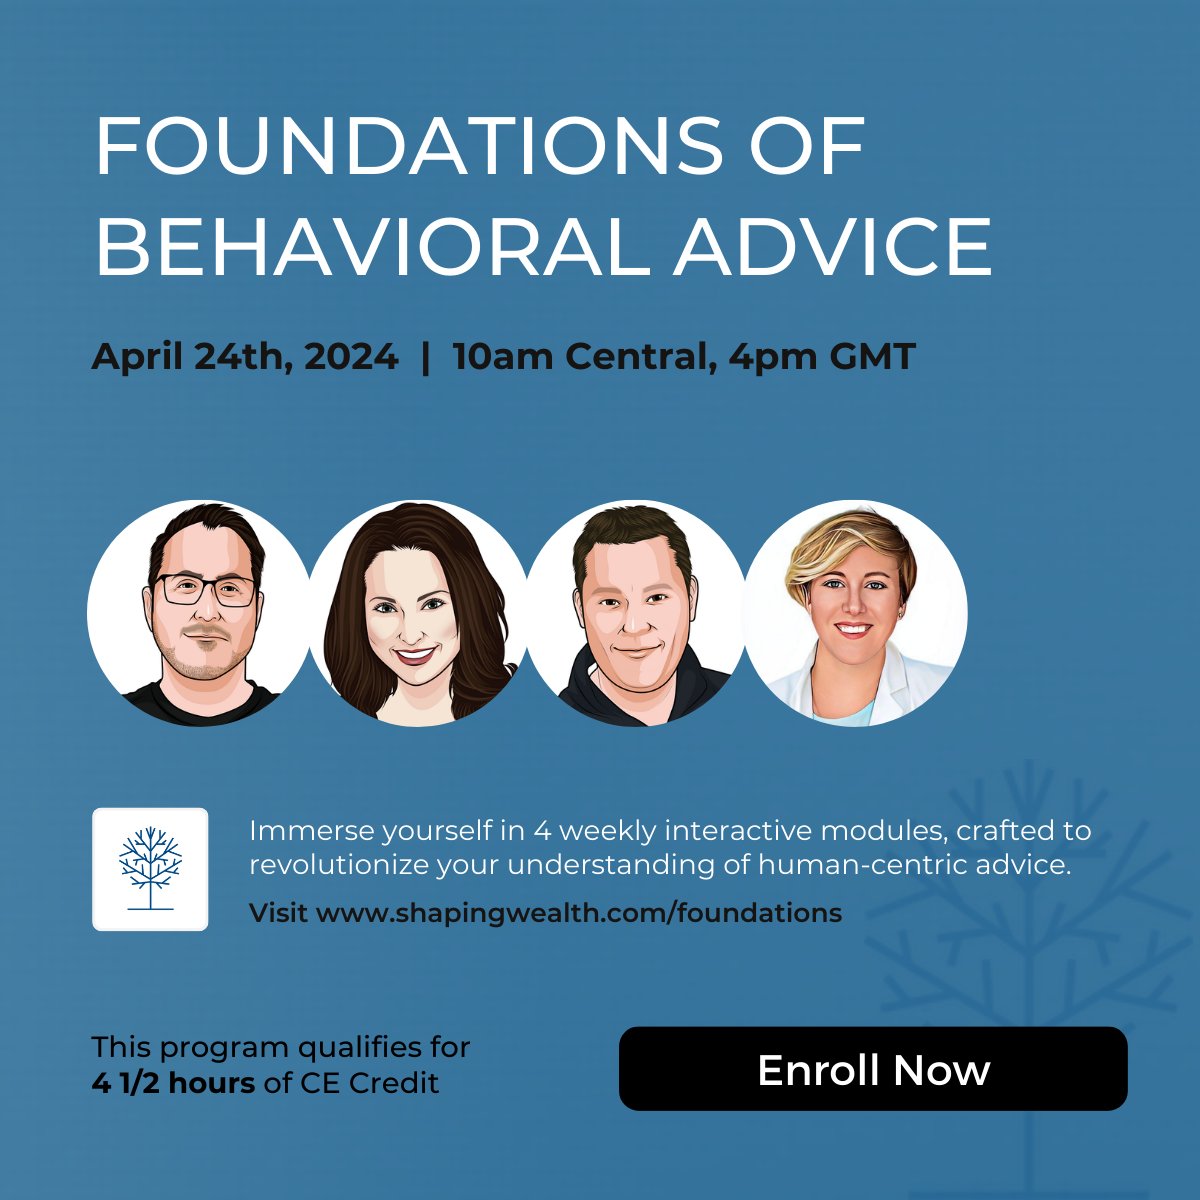 🚪 The doors are closing! Starting 4/24, join our Foundations of Behavioral Advice program @brianportnoy @neilbage @joylerepsyd @MeghaanL Deepen client engagement and build stronger human-centric wealth cultures. Special pricing when you enroll by 4/19: shapingwealth.com/foundations